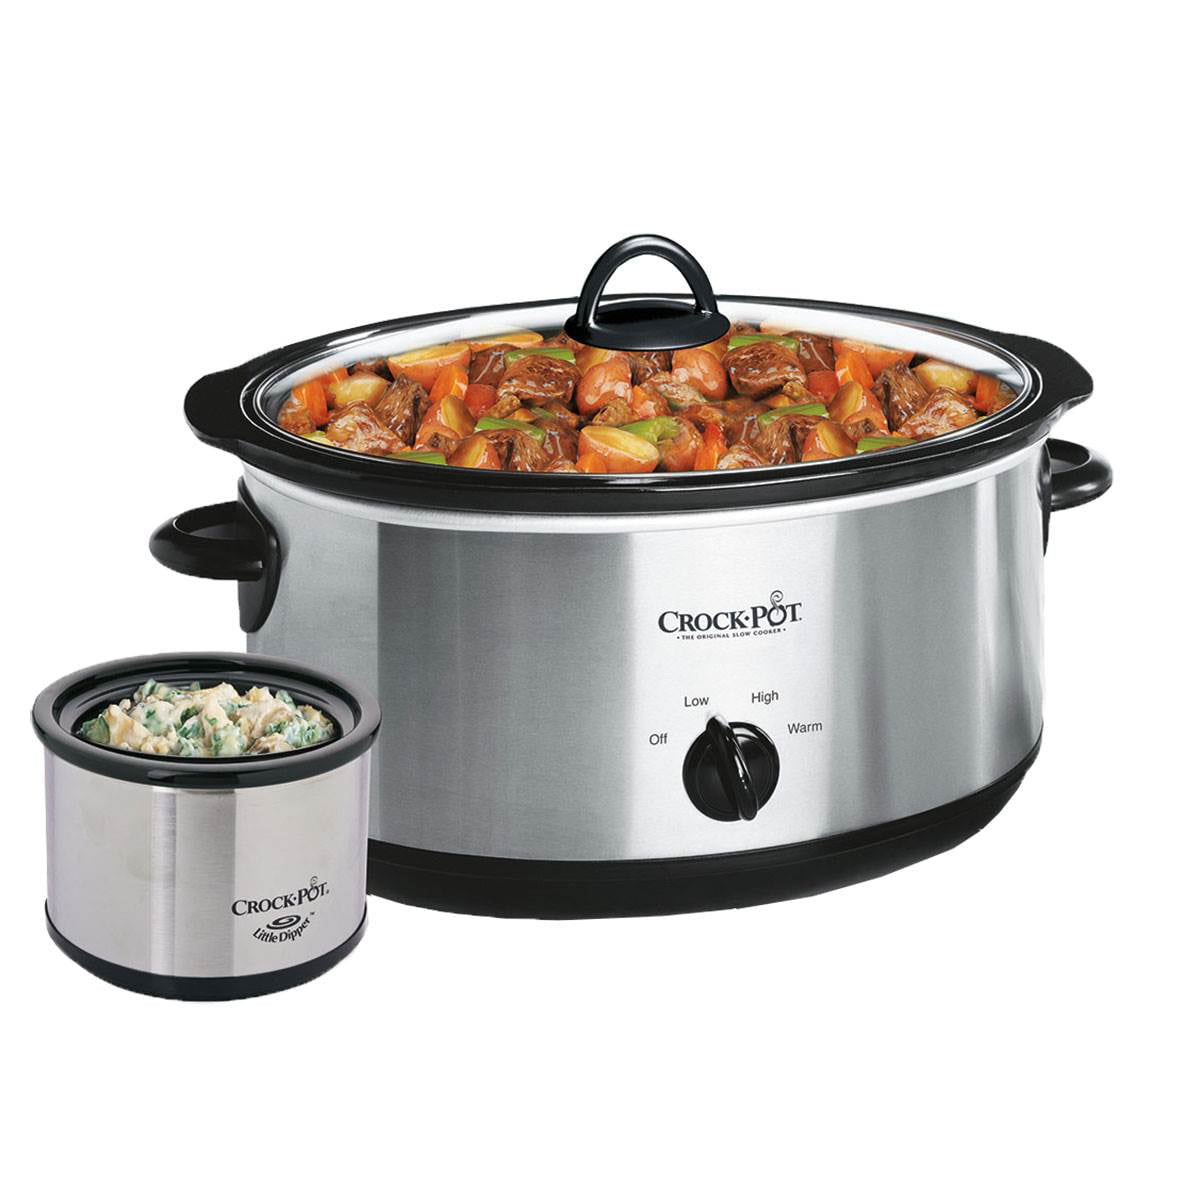 This Portable Crock-Pot Pale Lets You Cook Your Lunch Right At